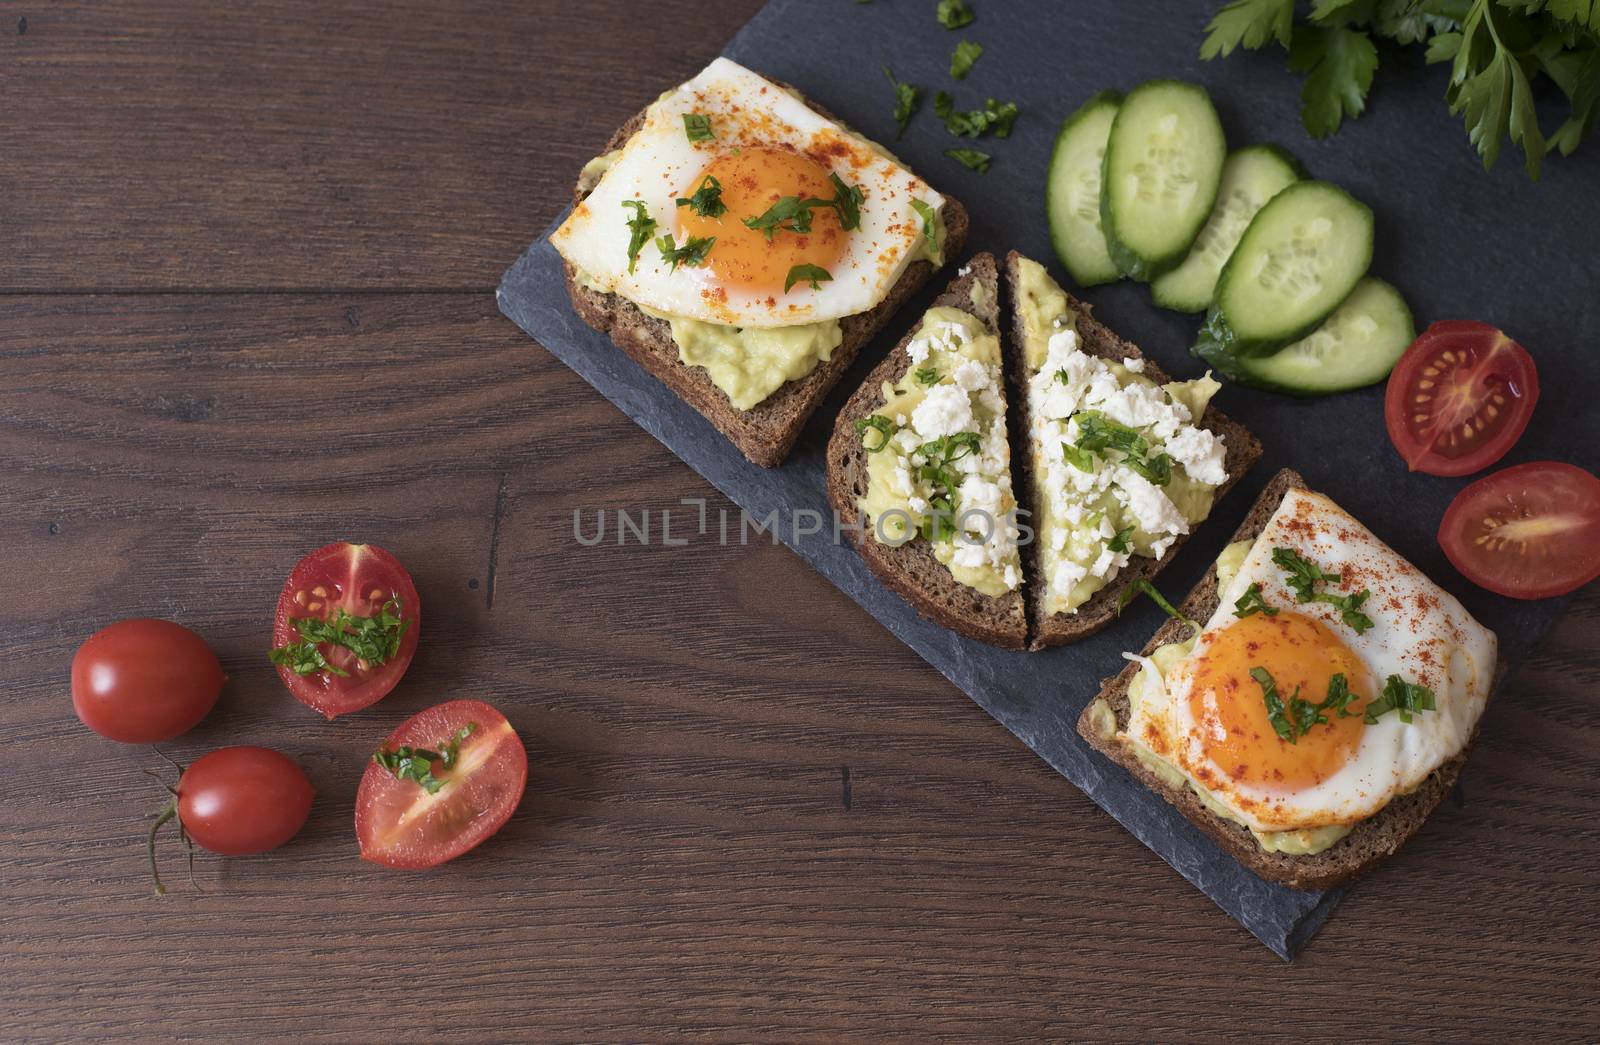 Avocado Toast. Healthy Breakfast. Top View. Homemade Sandwich With Avocado And Fried Eggs, Cherry Tomato And Cucumbers On A Wooden Background. Dark Food Photography